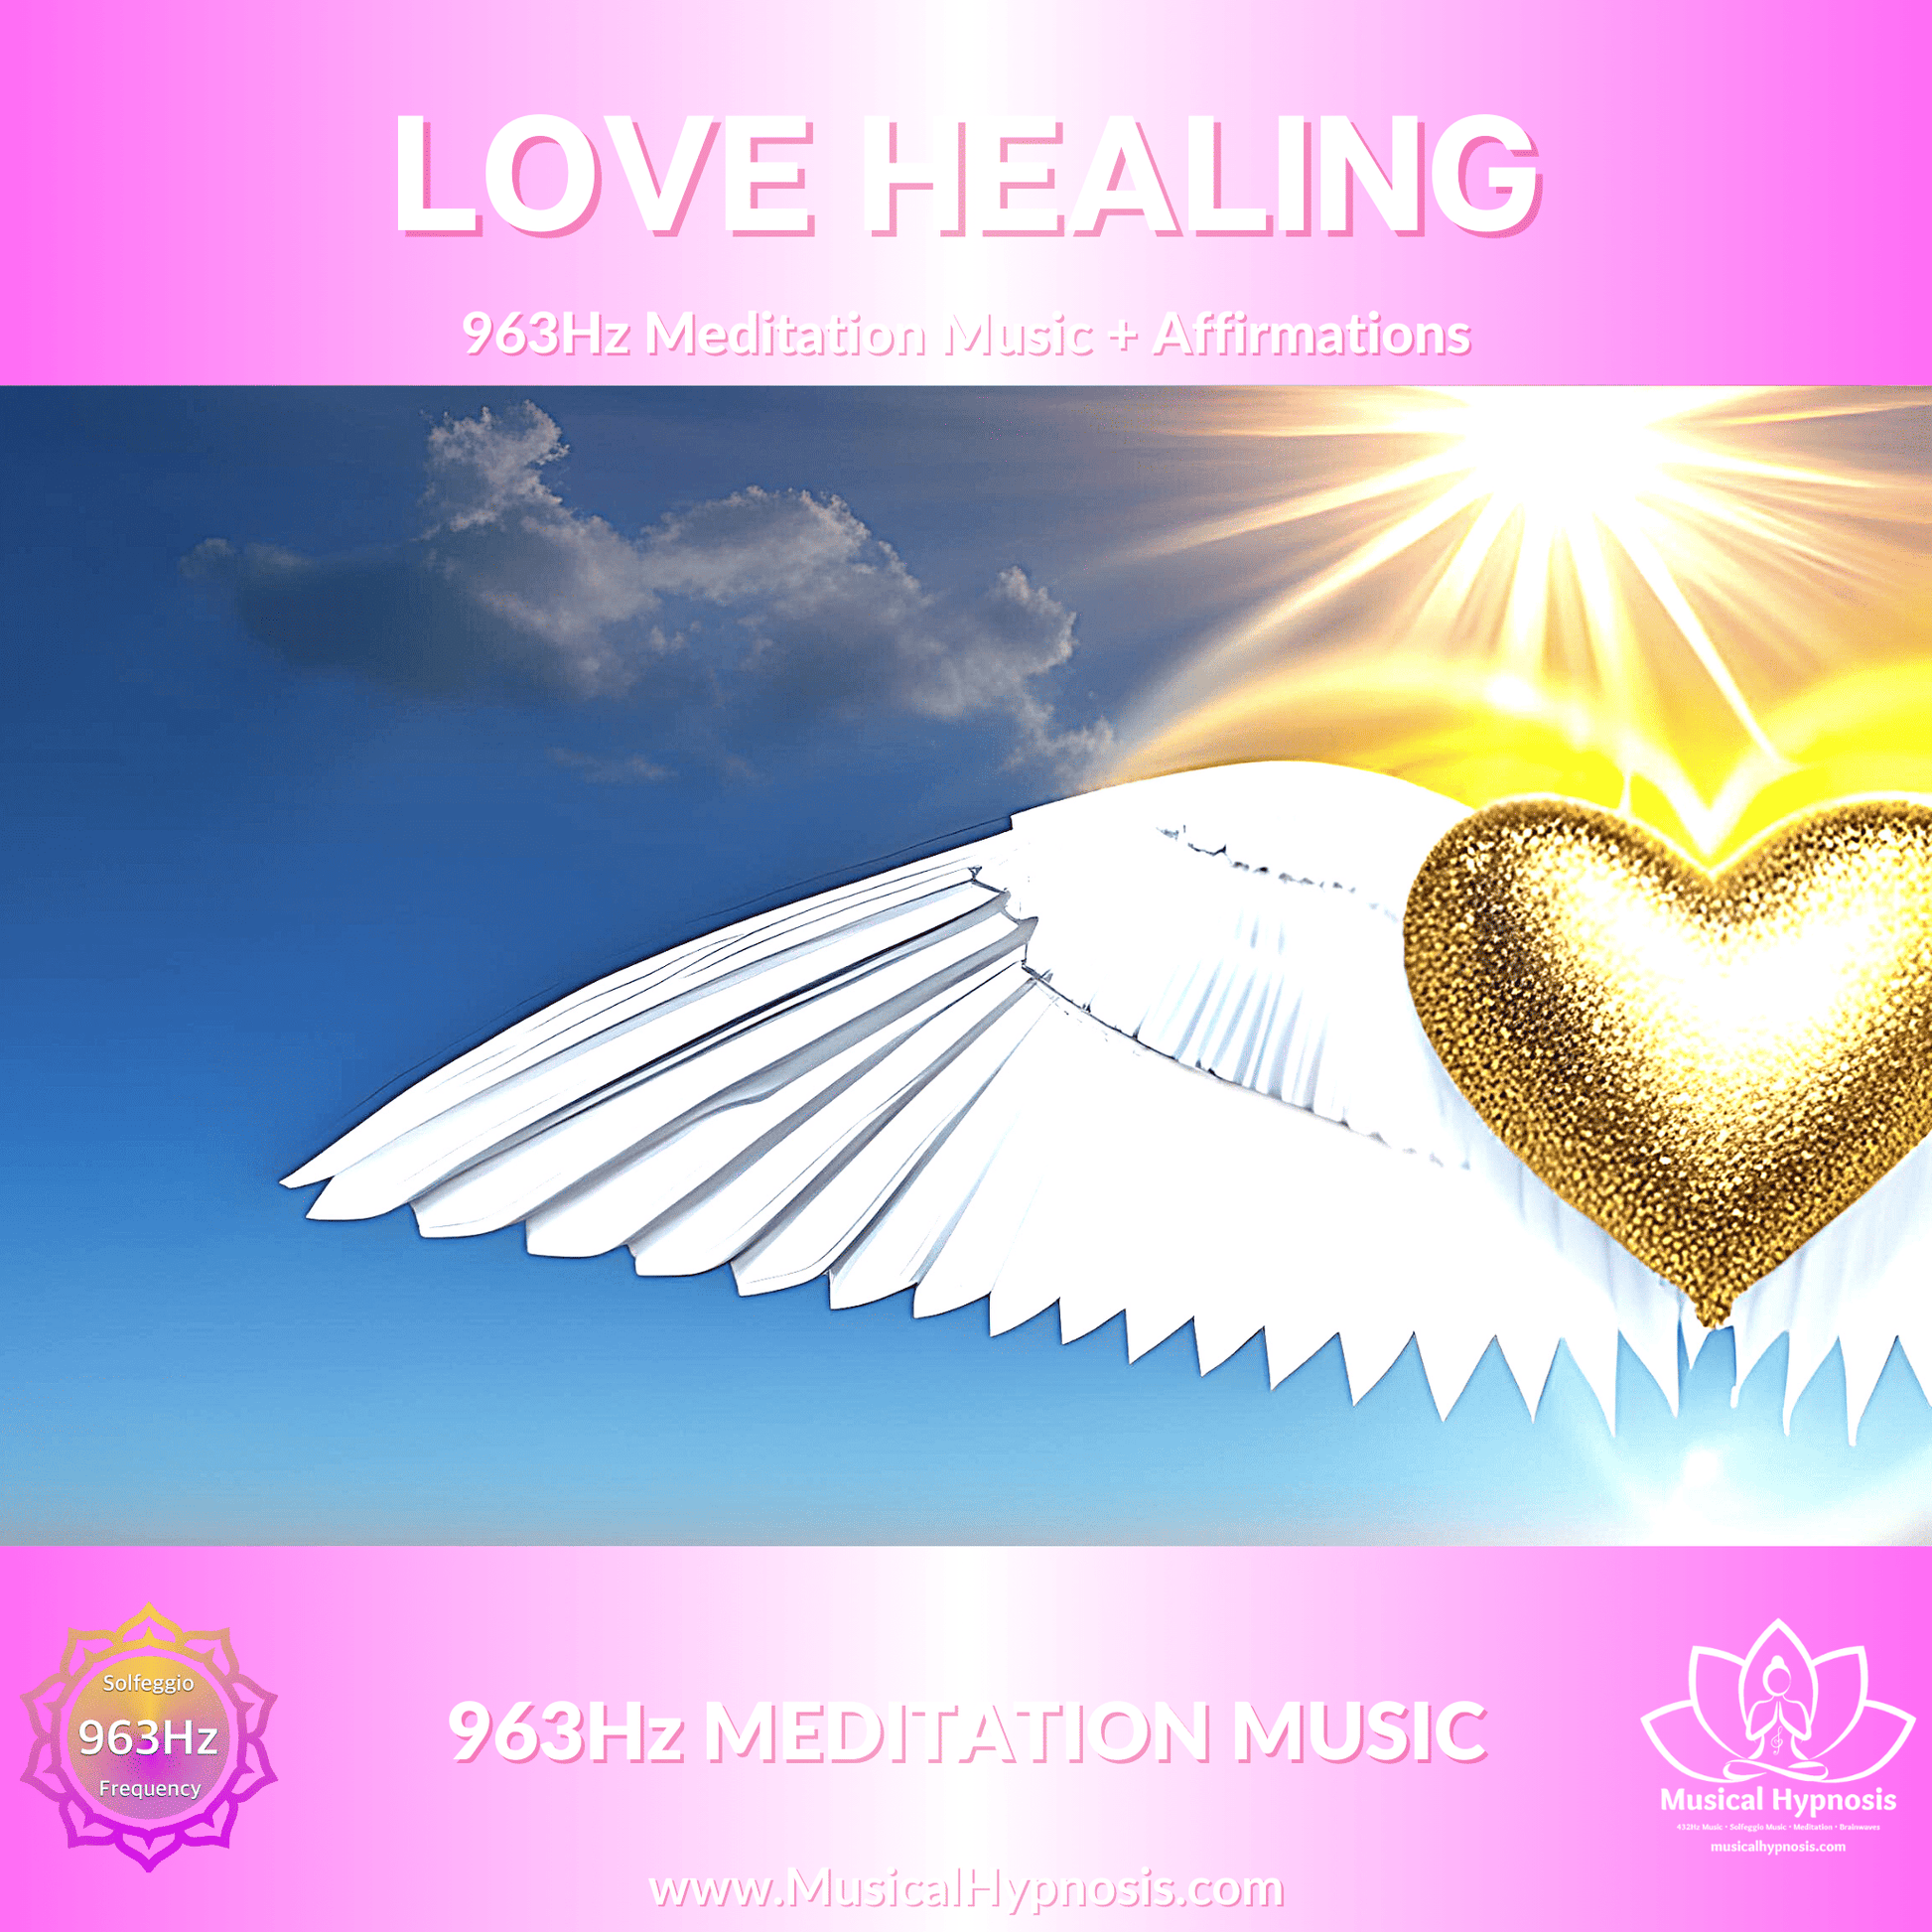 Love Healing 963Hz Meditation Music plus Affirmations by Musical Hypnosis